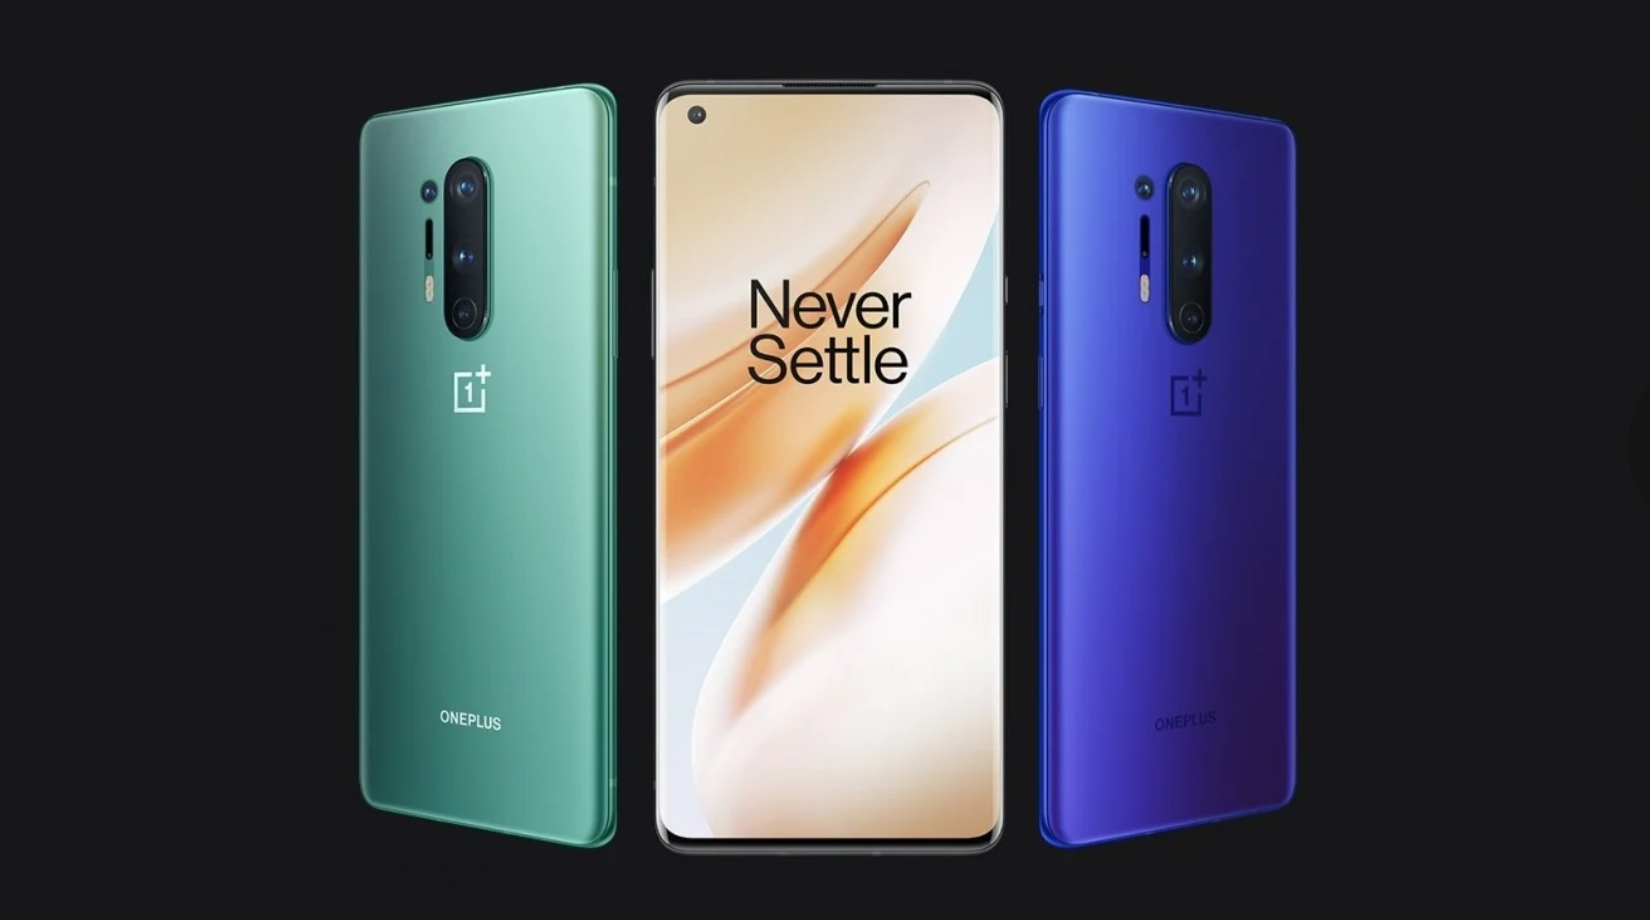 oneplus-wants-to-sell-cheaper-phones-and-build-an-ecosystem-like-xiaomi